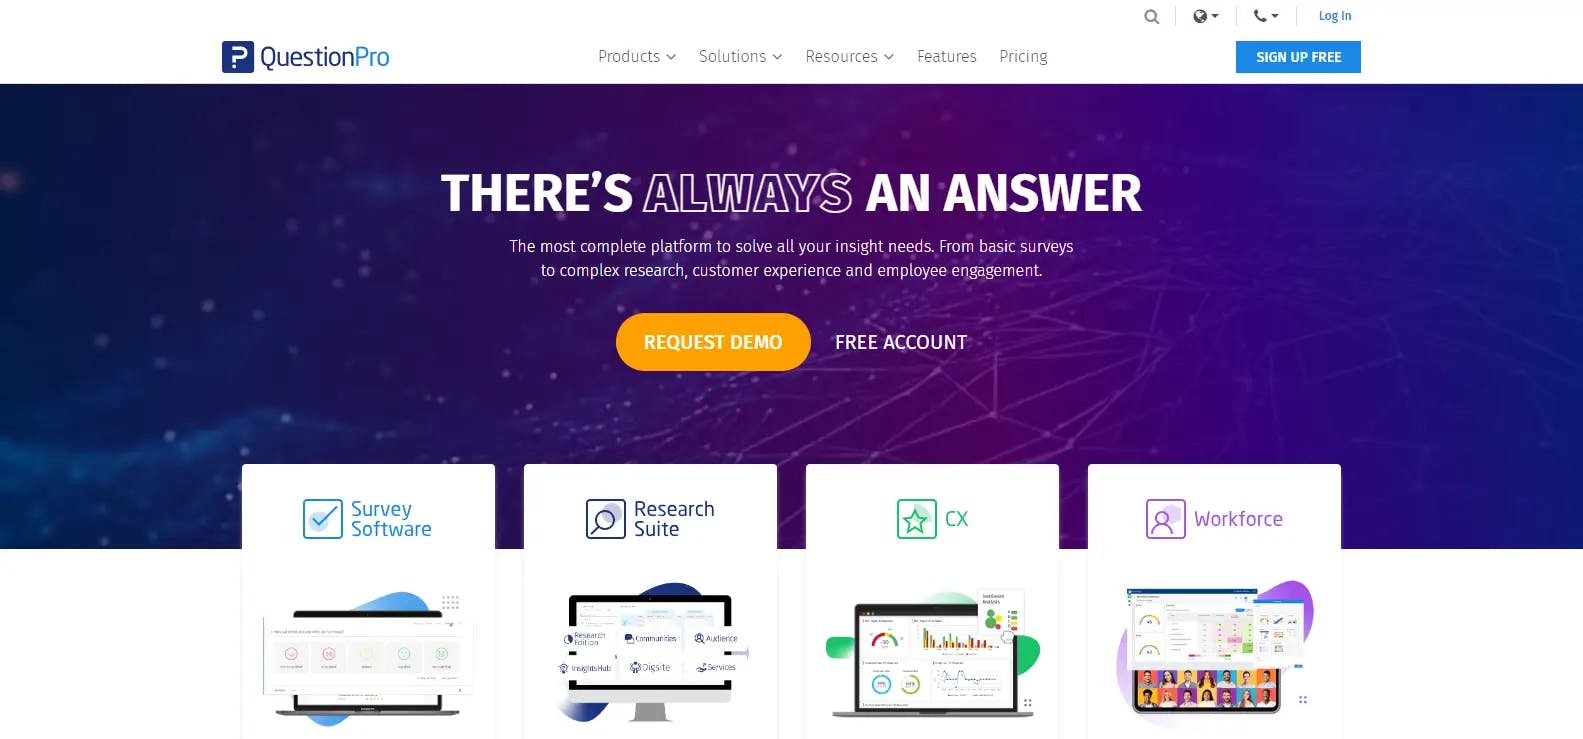 QuestionPro is an online survey software for creating and distributing software